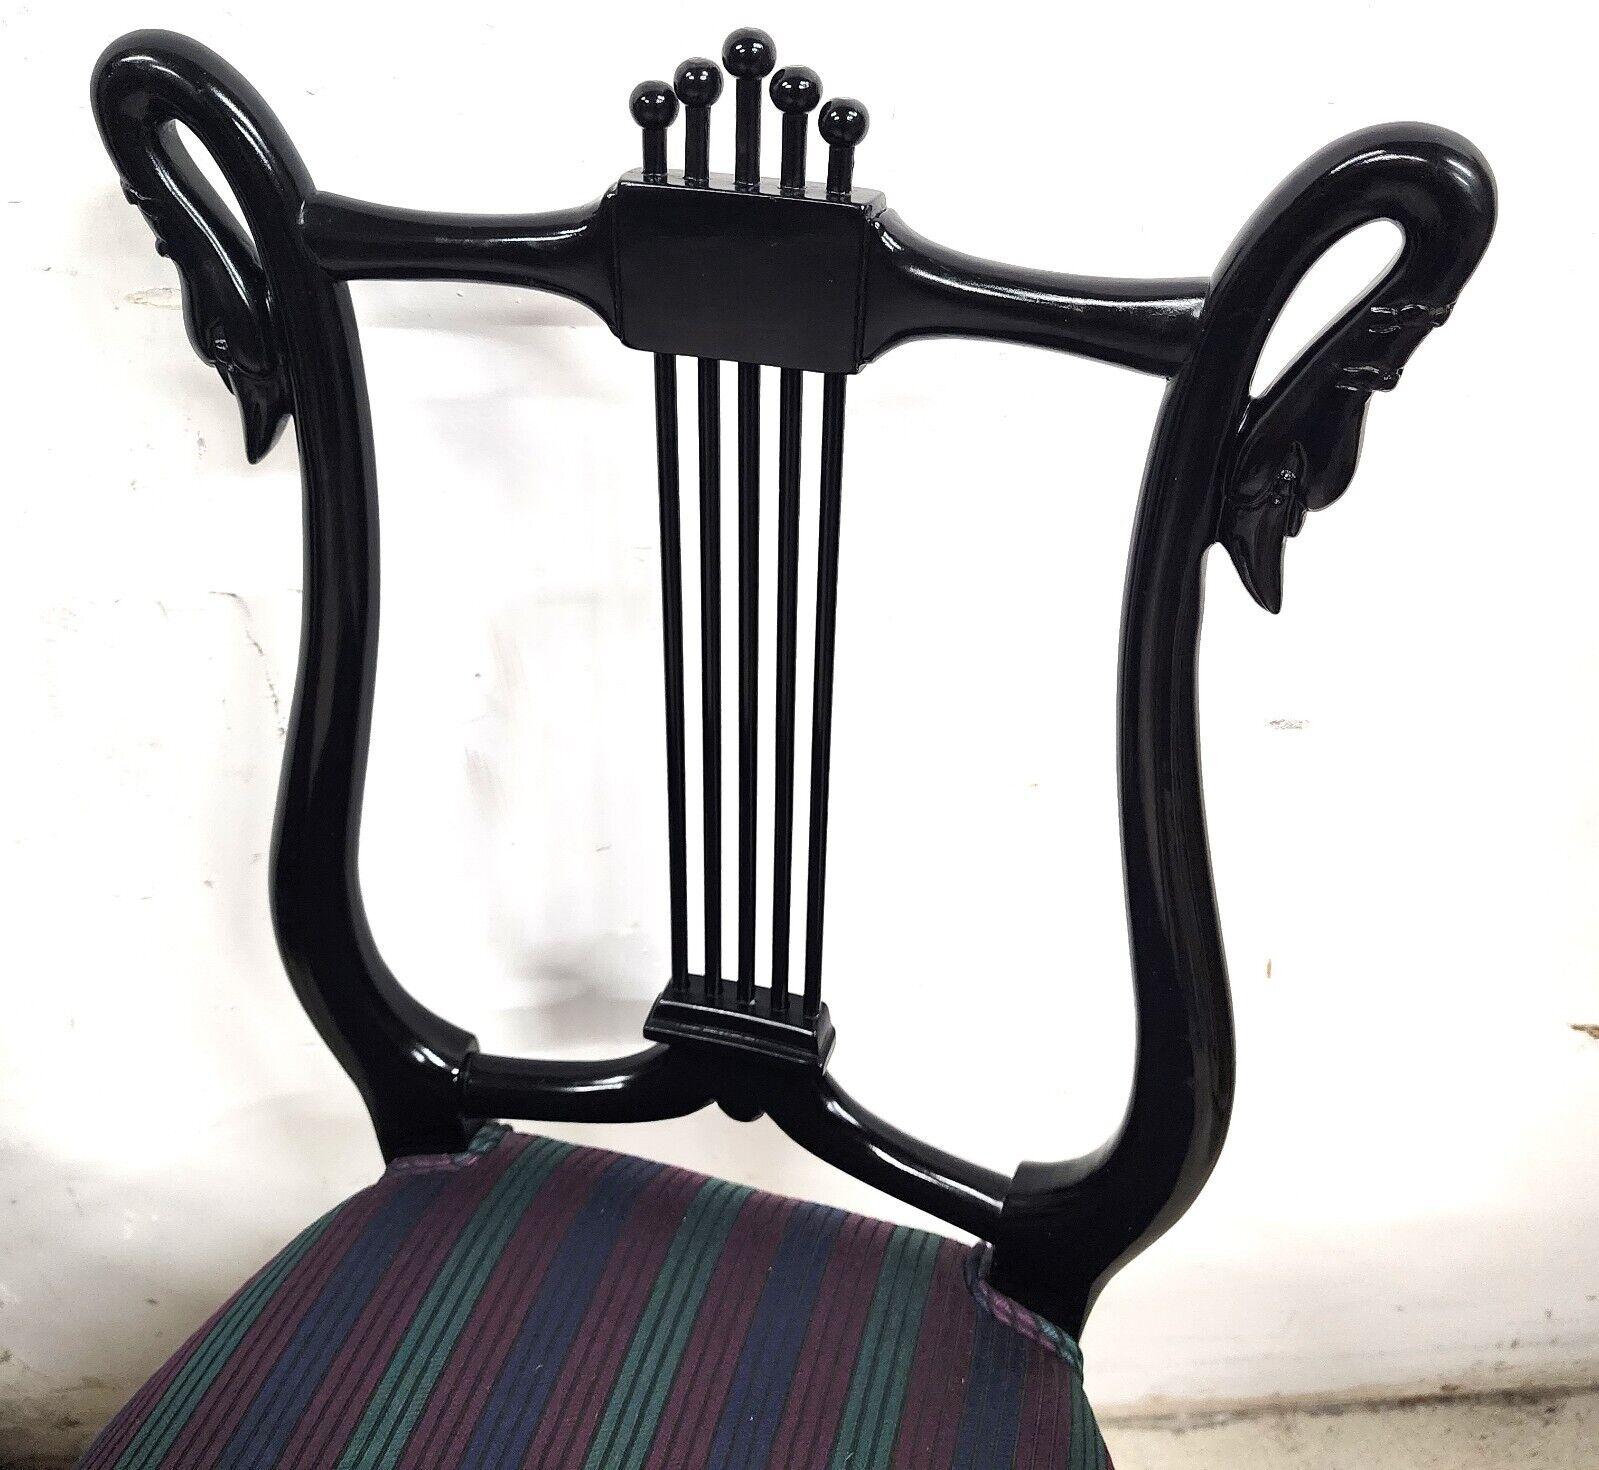 For FULL item description click on CONTINUE READING at the bottom of this page.

Offering One Of Our Recent Palm Beach Estate Fine Furniture Acquisitions Of A
Pair of Swan and Lyre Back Black Lacquered Accent Dining Chairs 

Approximate Measurements